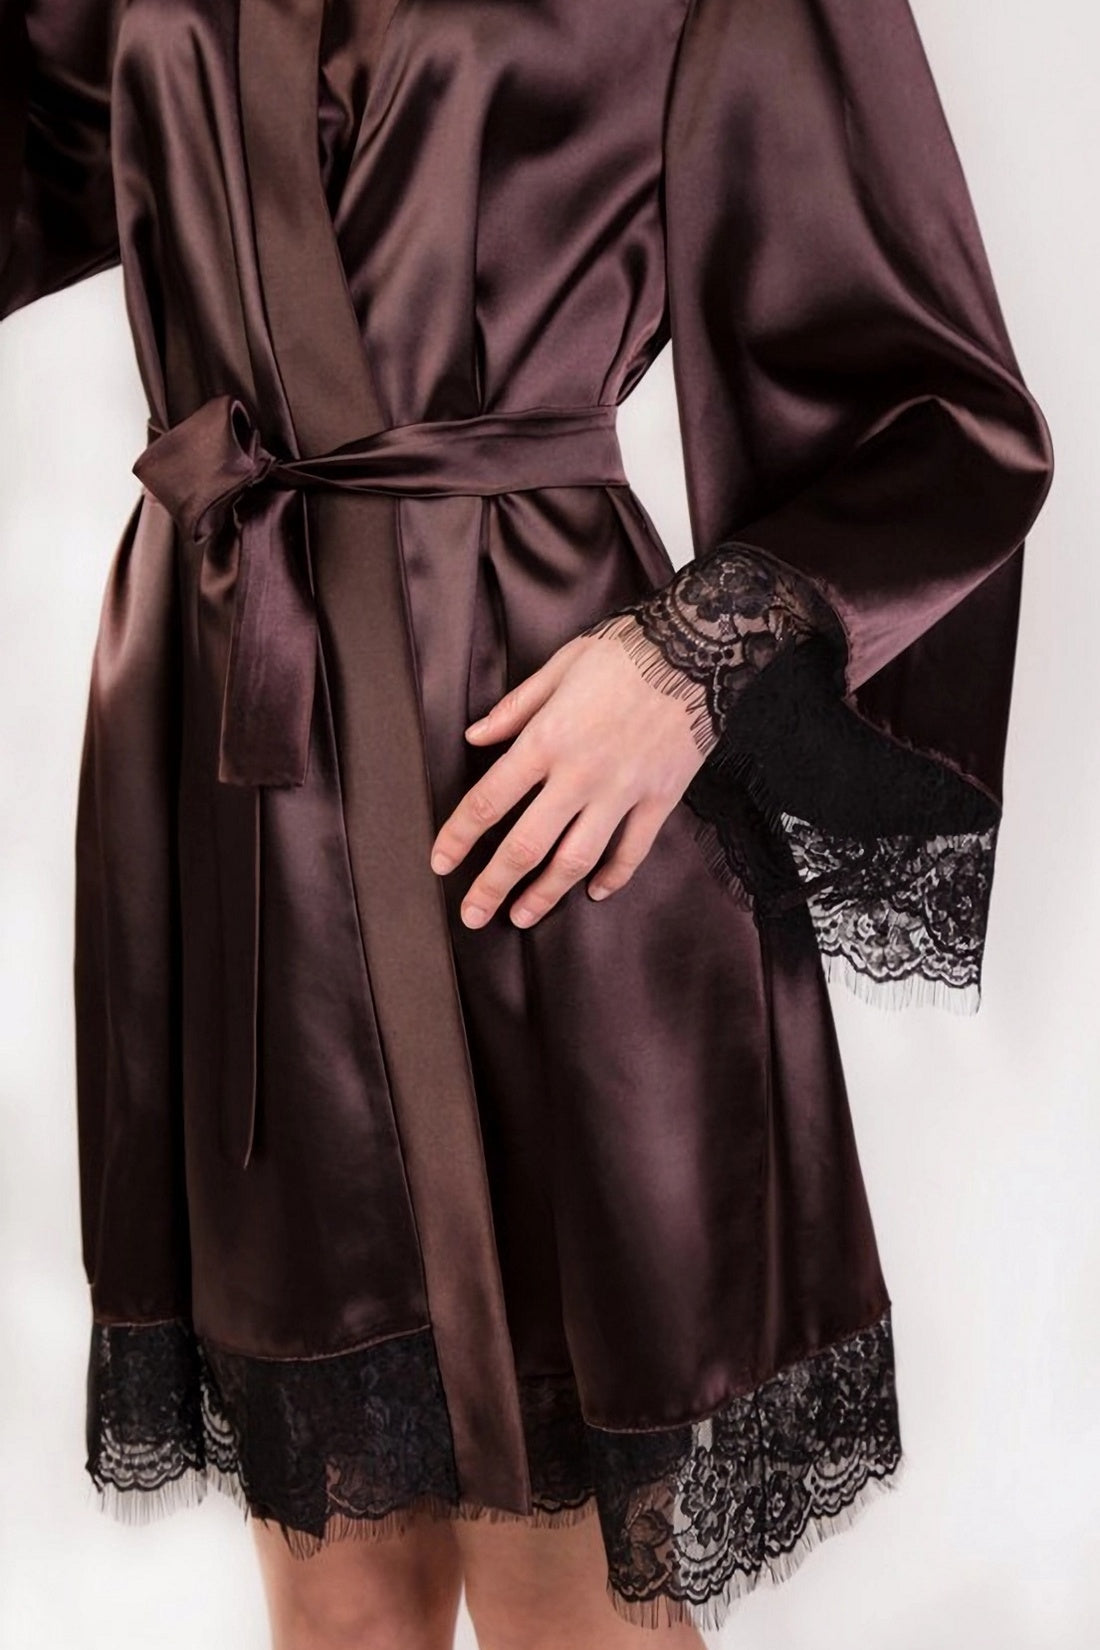 Bridesmaid robe - Brown satin with black lace